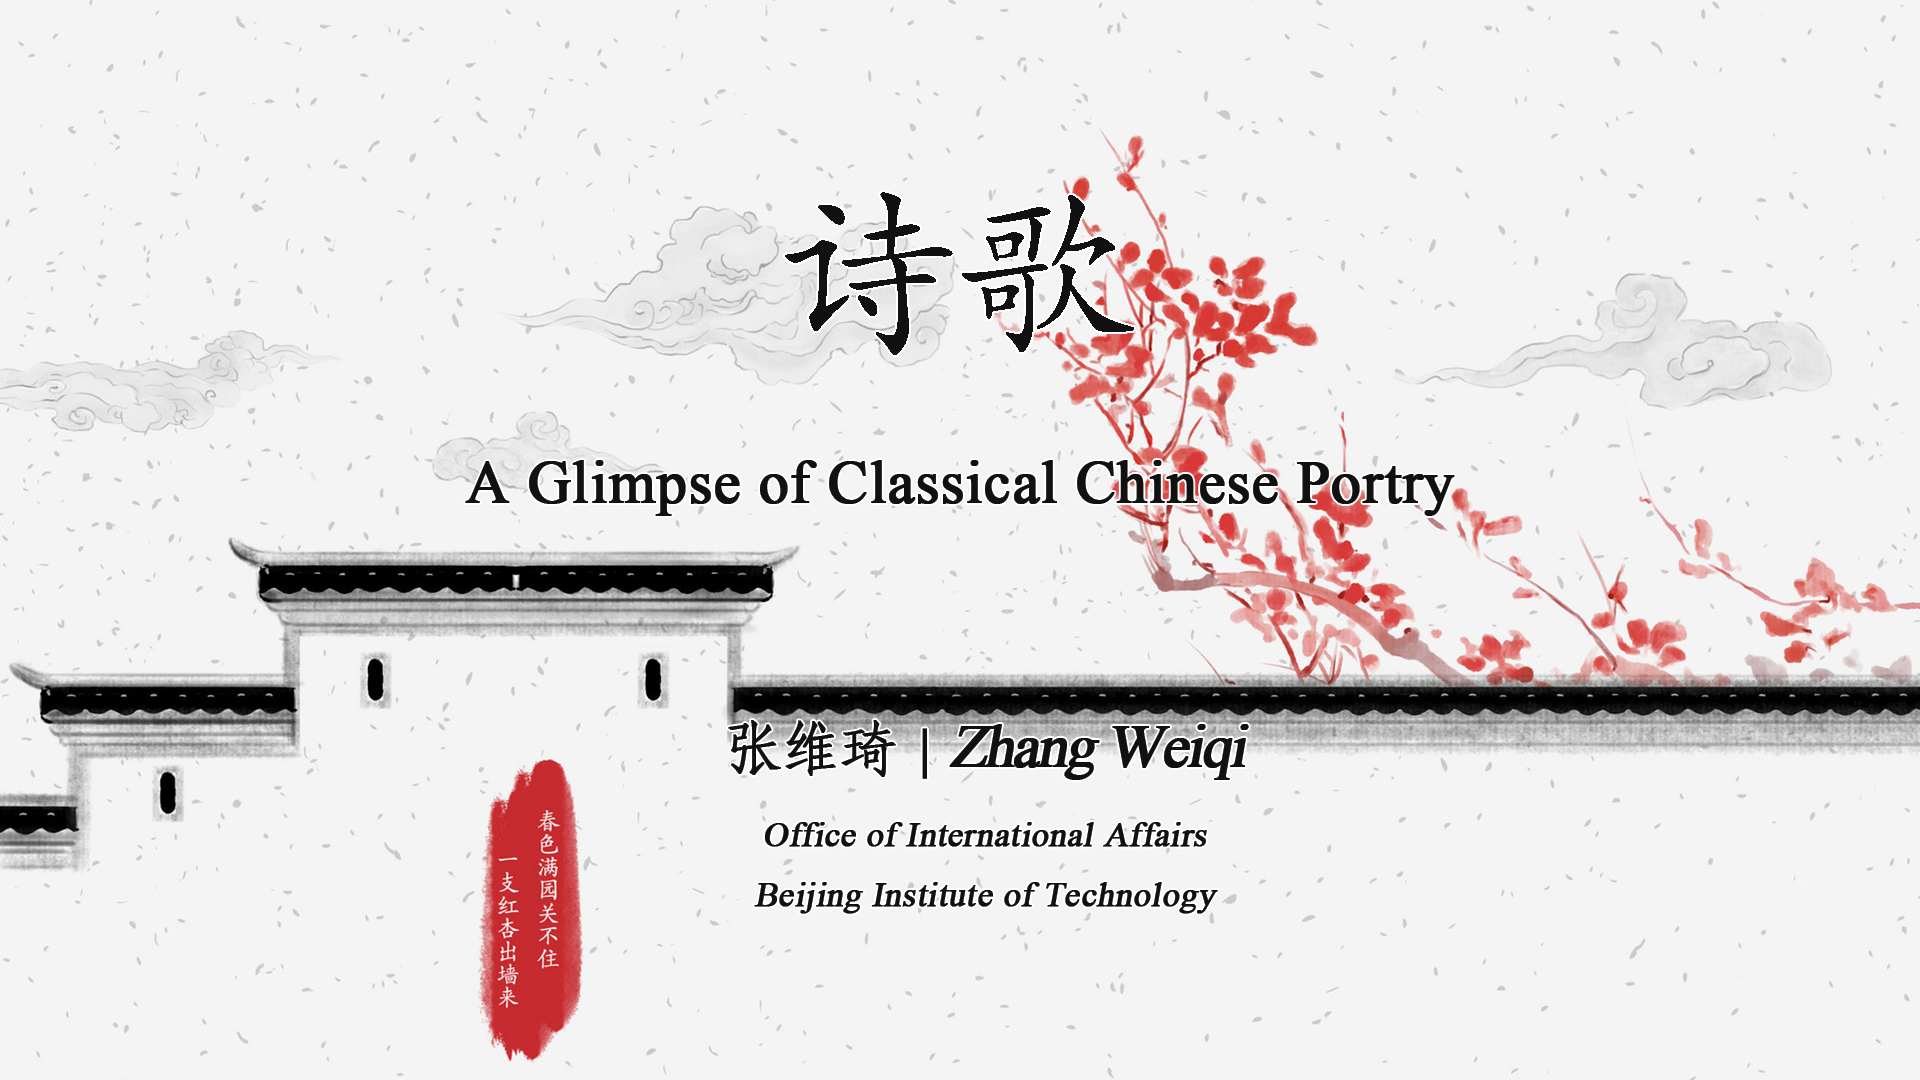 A Glimpse of Classical Chinese Poetry